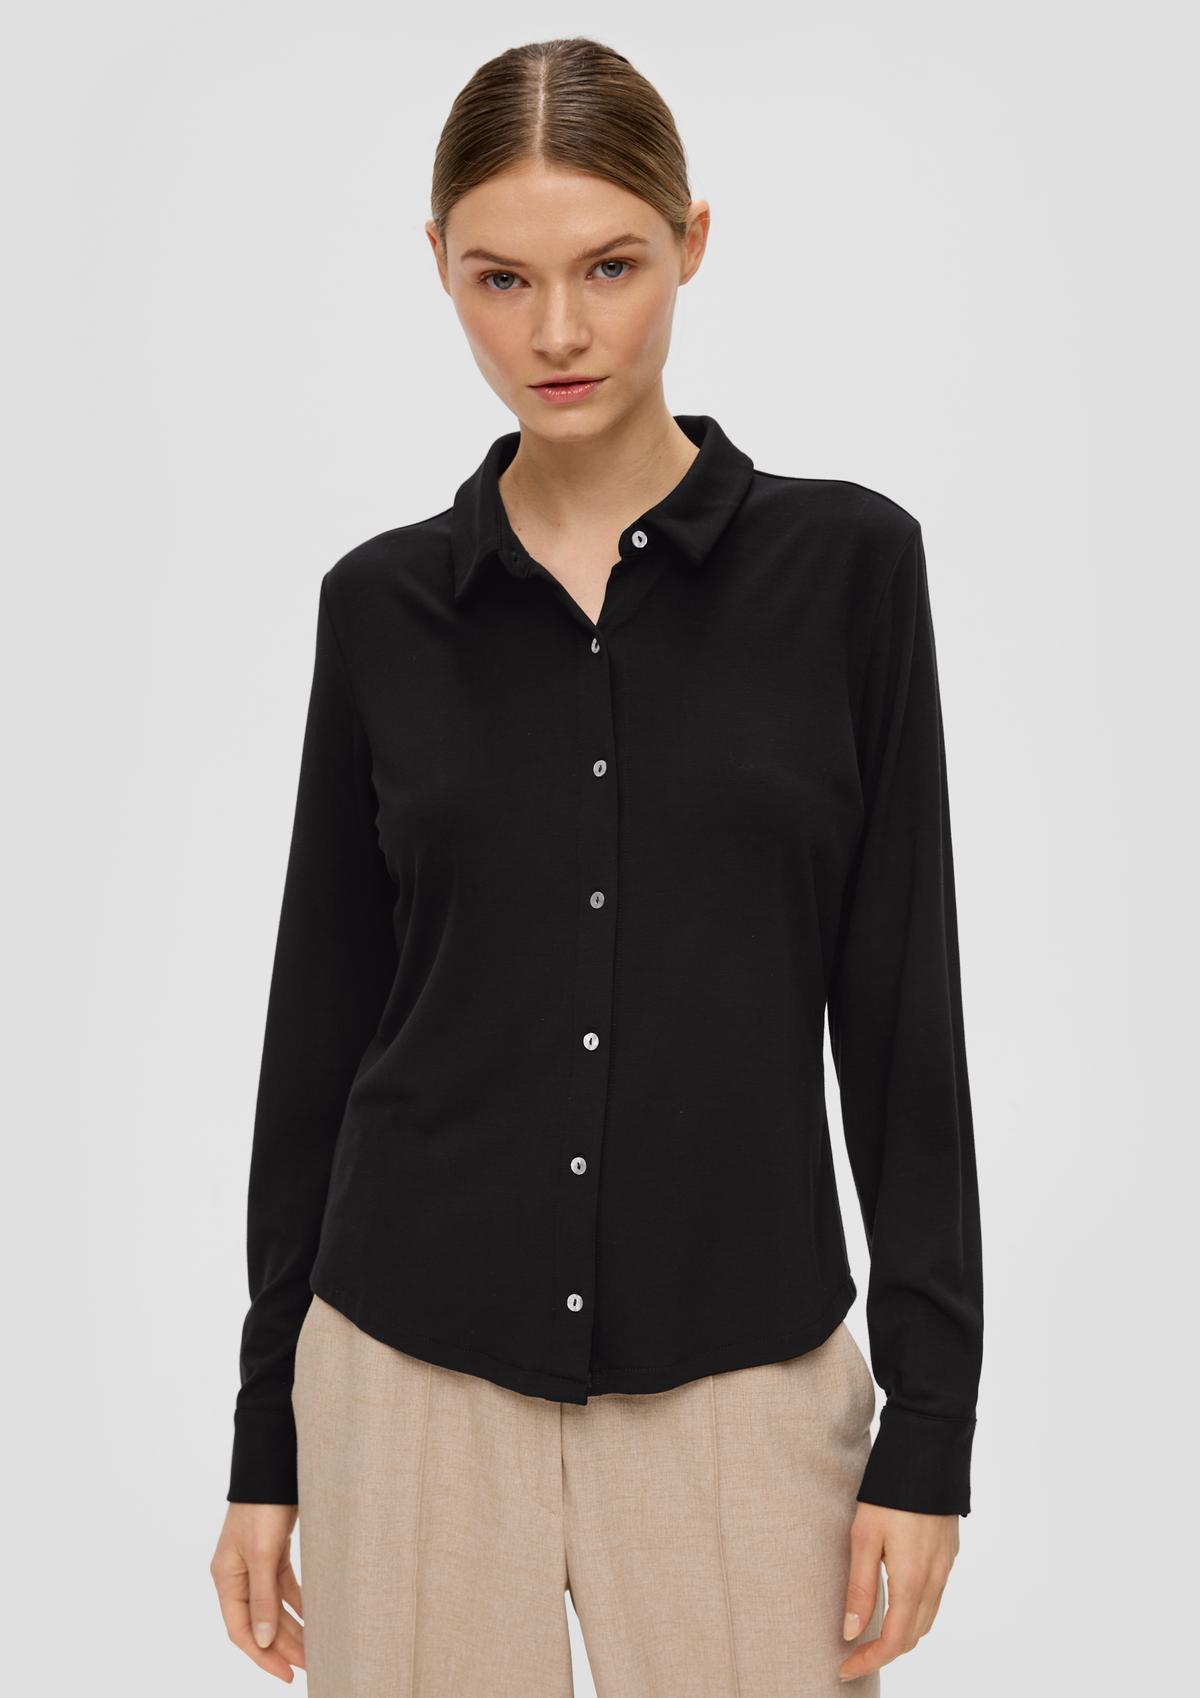 s.Oliver Shirt blouse made of interlock jersey